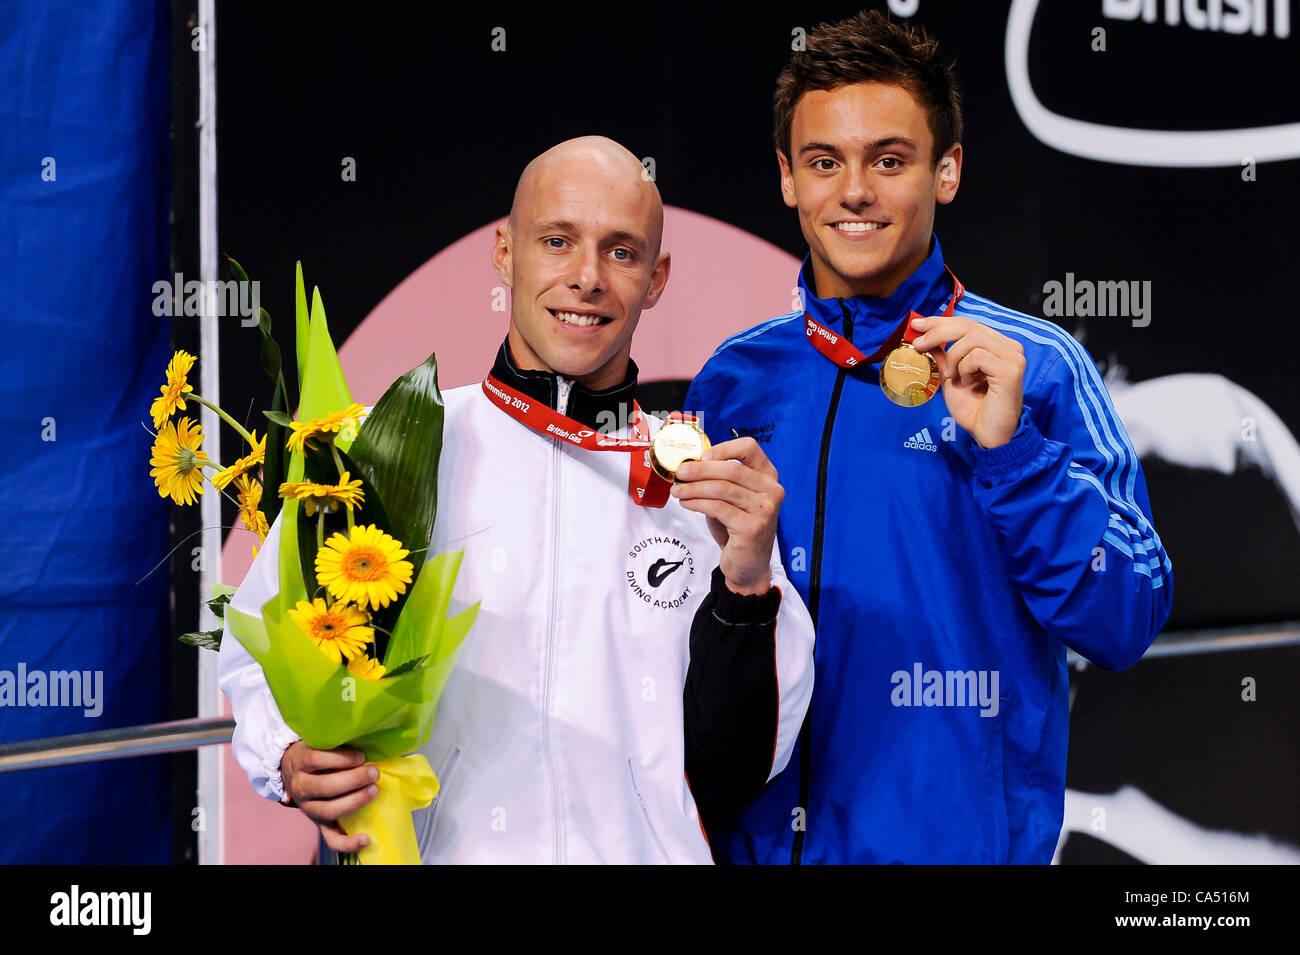 08.06.2012 Sheffield, England. Thomas Daley and Peter Waterfield (Plymouth Diving and Southampton DA) pose with their Gold Medals after winning the Mens 10m Synchro Platform Final on Day 1 of the 2012 British Gas Diving Championships (and Team GB Olympic Squad Selection Trials) at Ponds Forge Intern Stock Photo